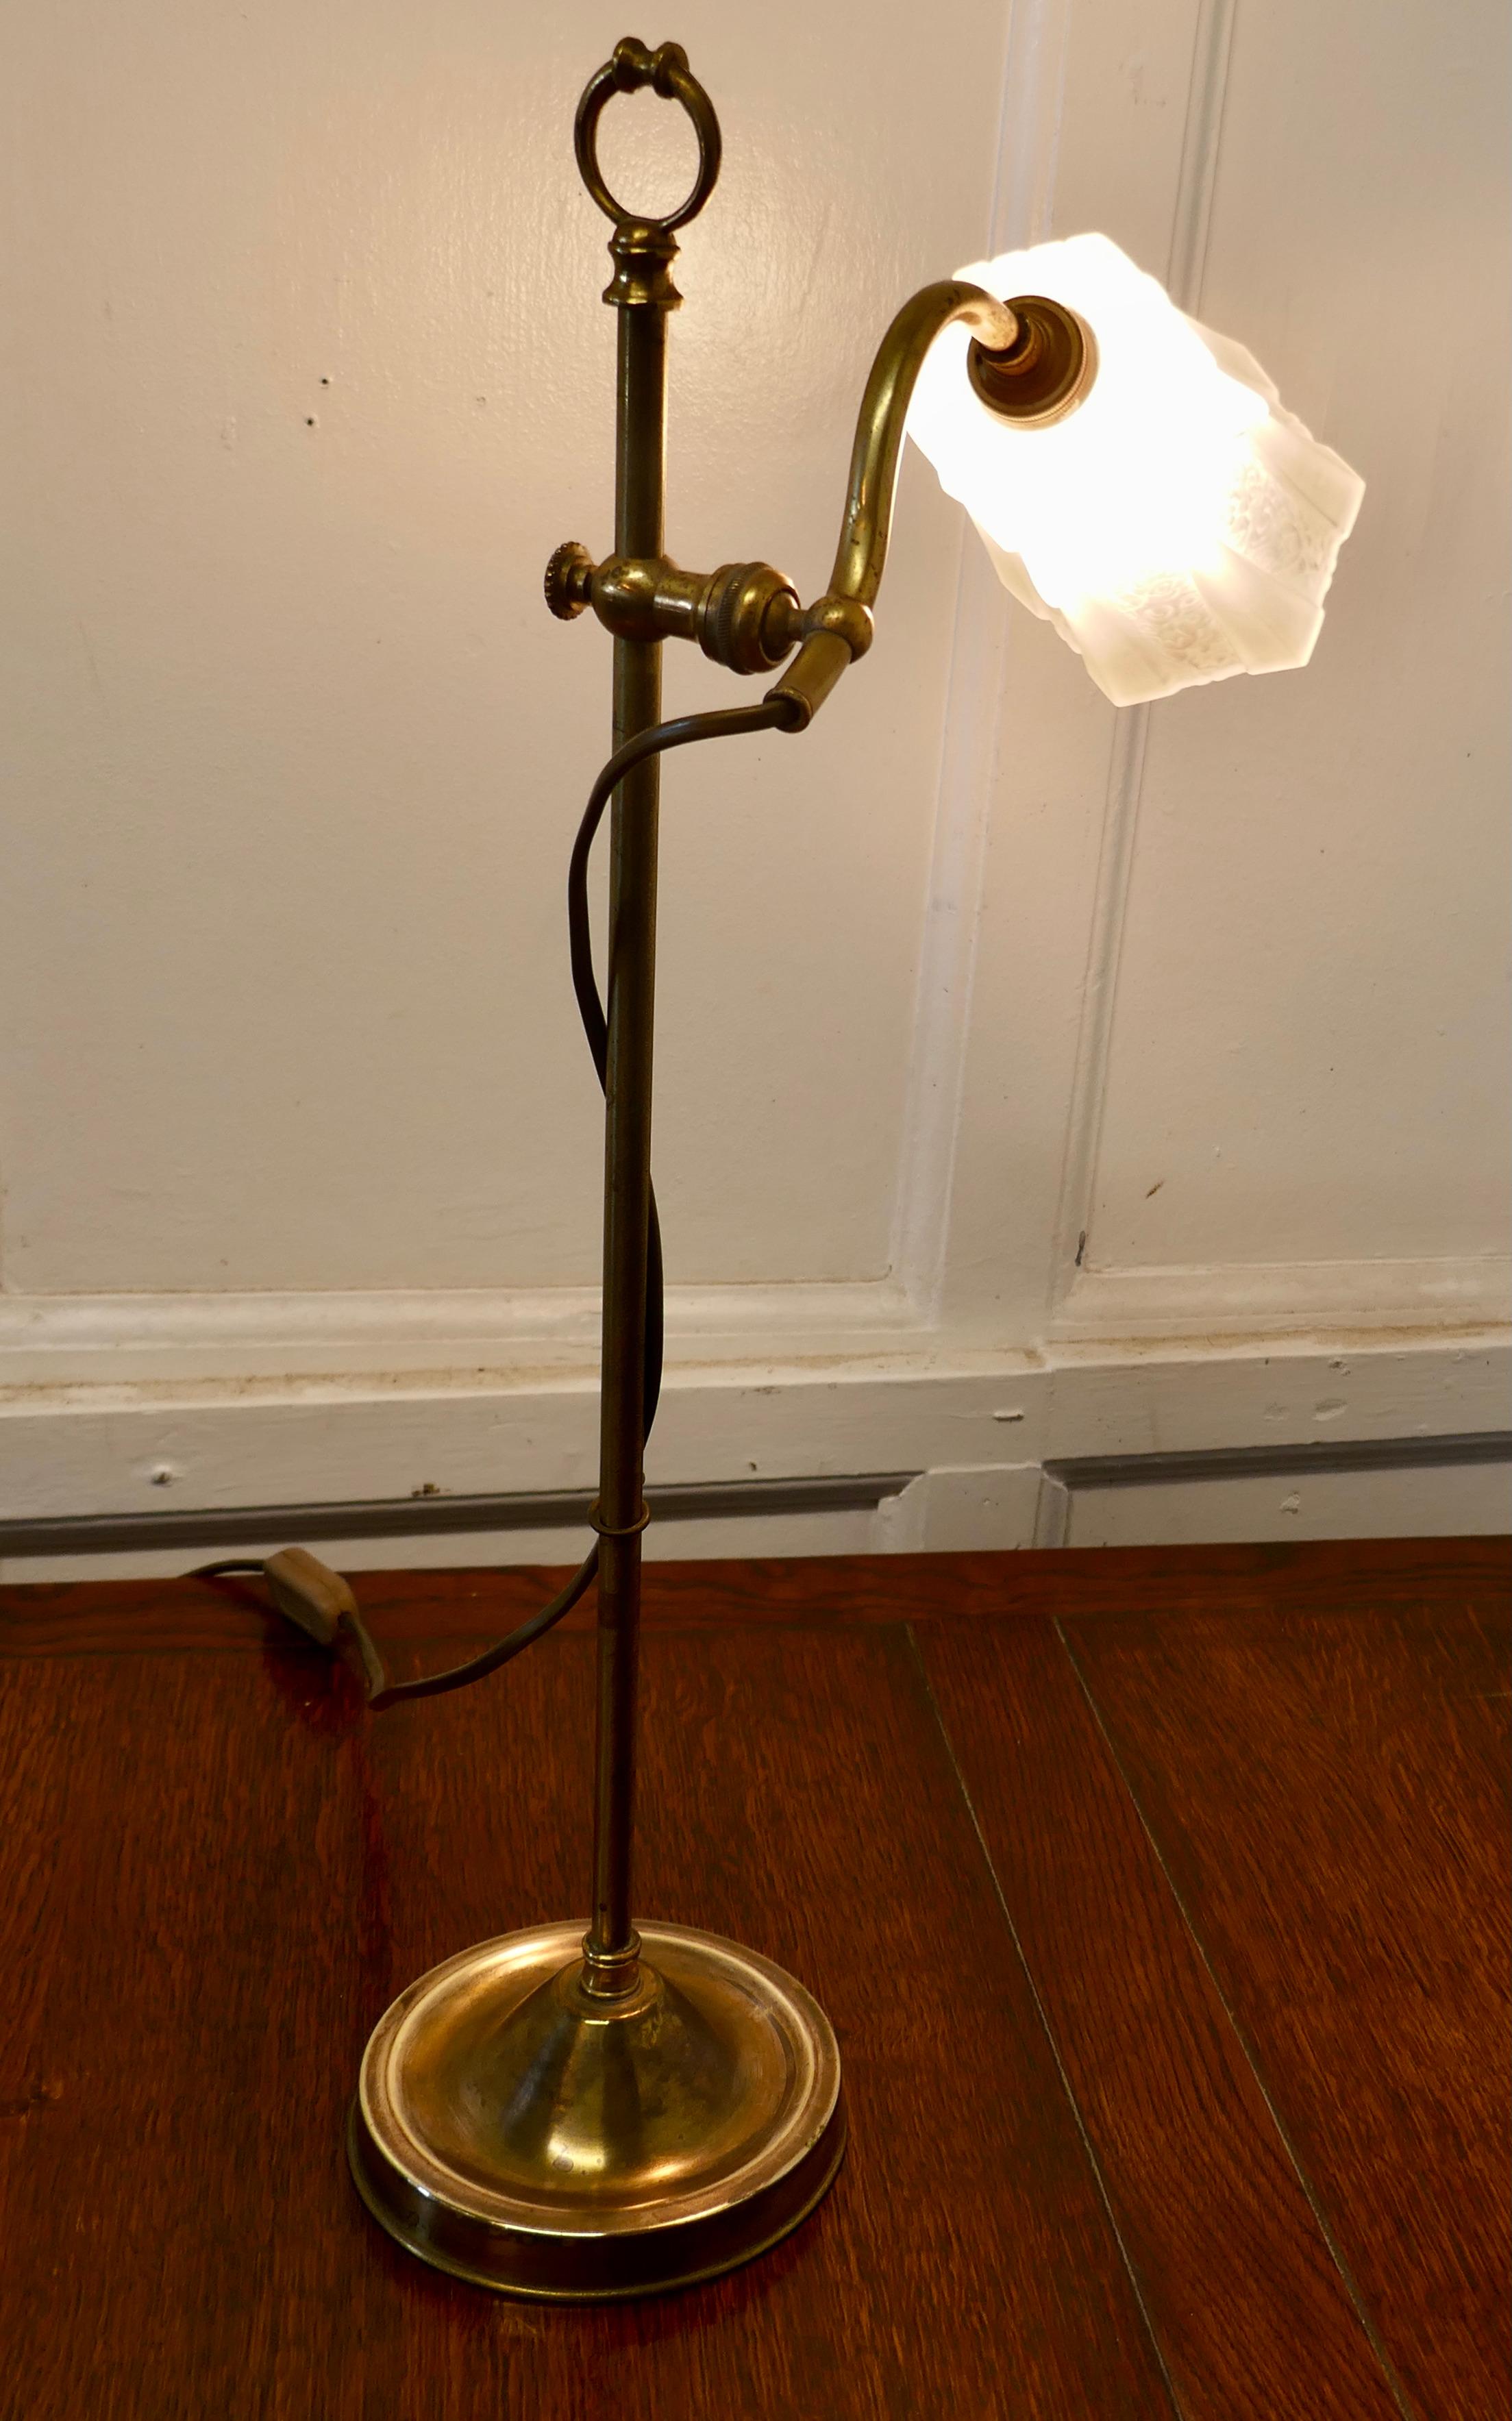 French brass desk lamp with opaline glass shade

This is a very attractive piece, the lamp has a central column which supports a swan neck arm, this can be raised, lowered and swivelled into different positions
The lamp comes with its original